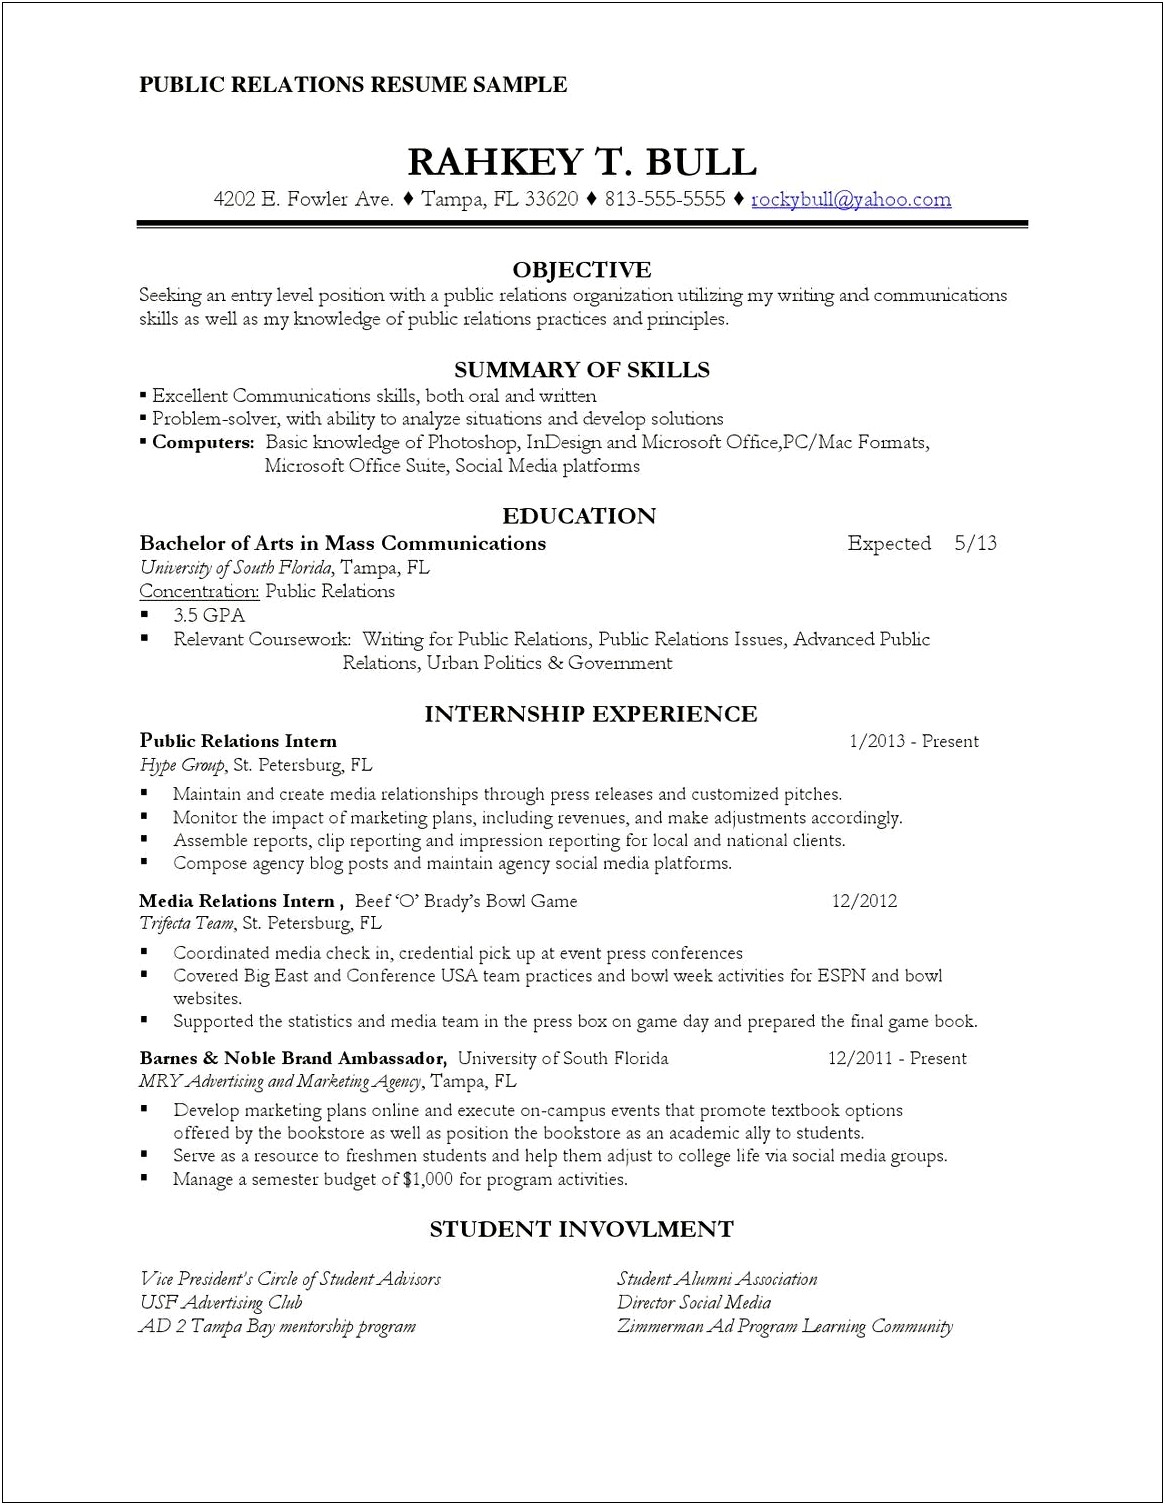 Examples Of Great Government Relations Resumes